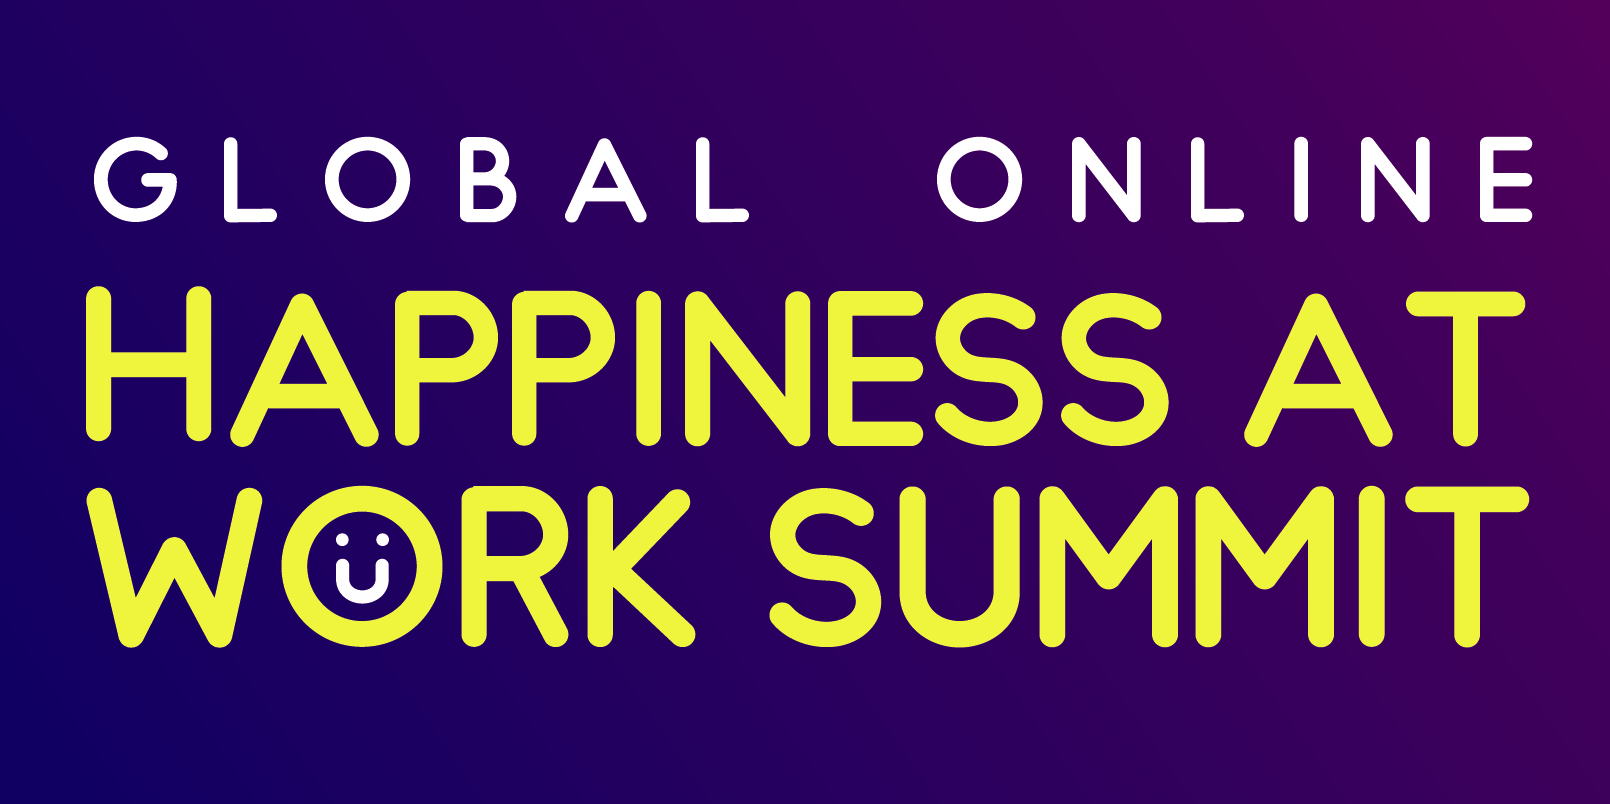 Global Online Happiness at Work Summit 2022 | Happiness at Work